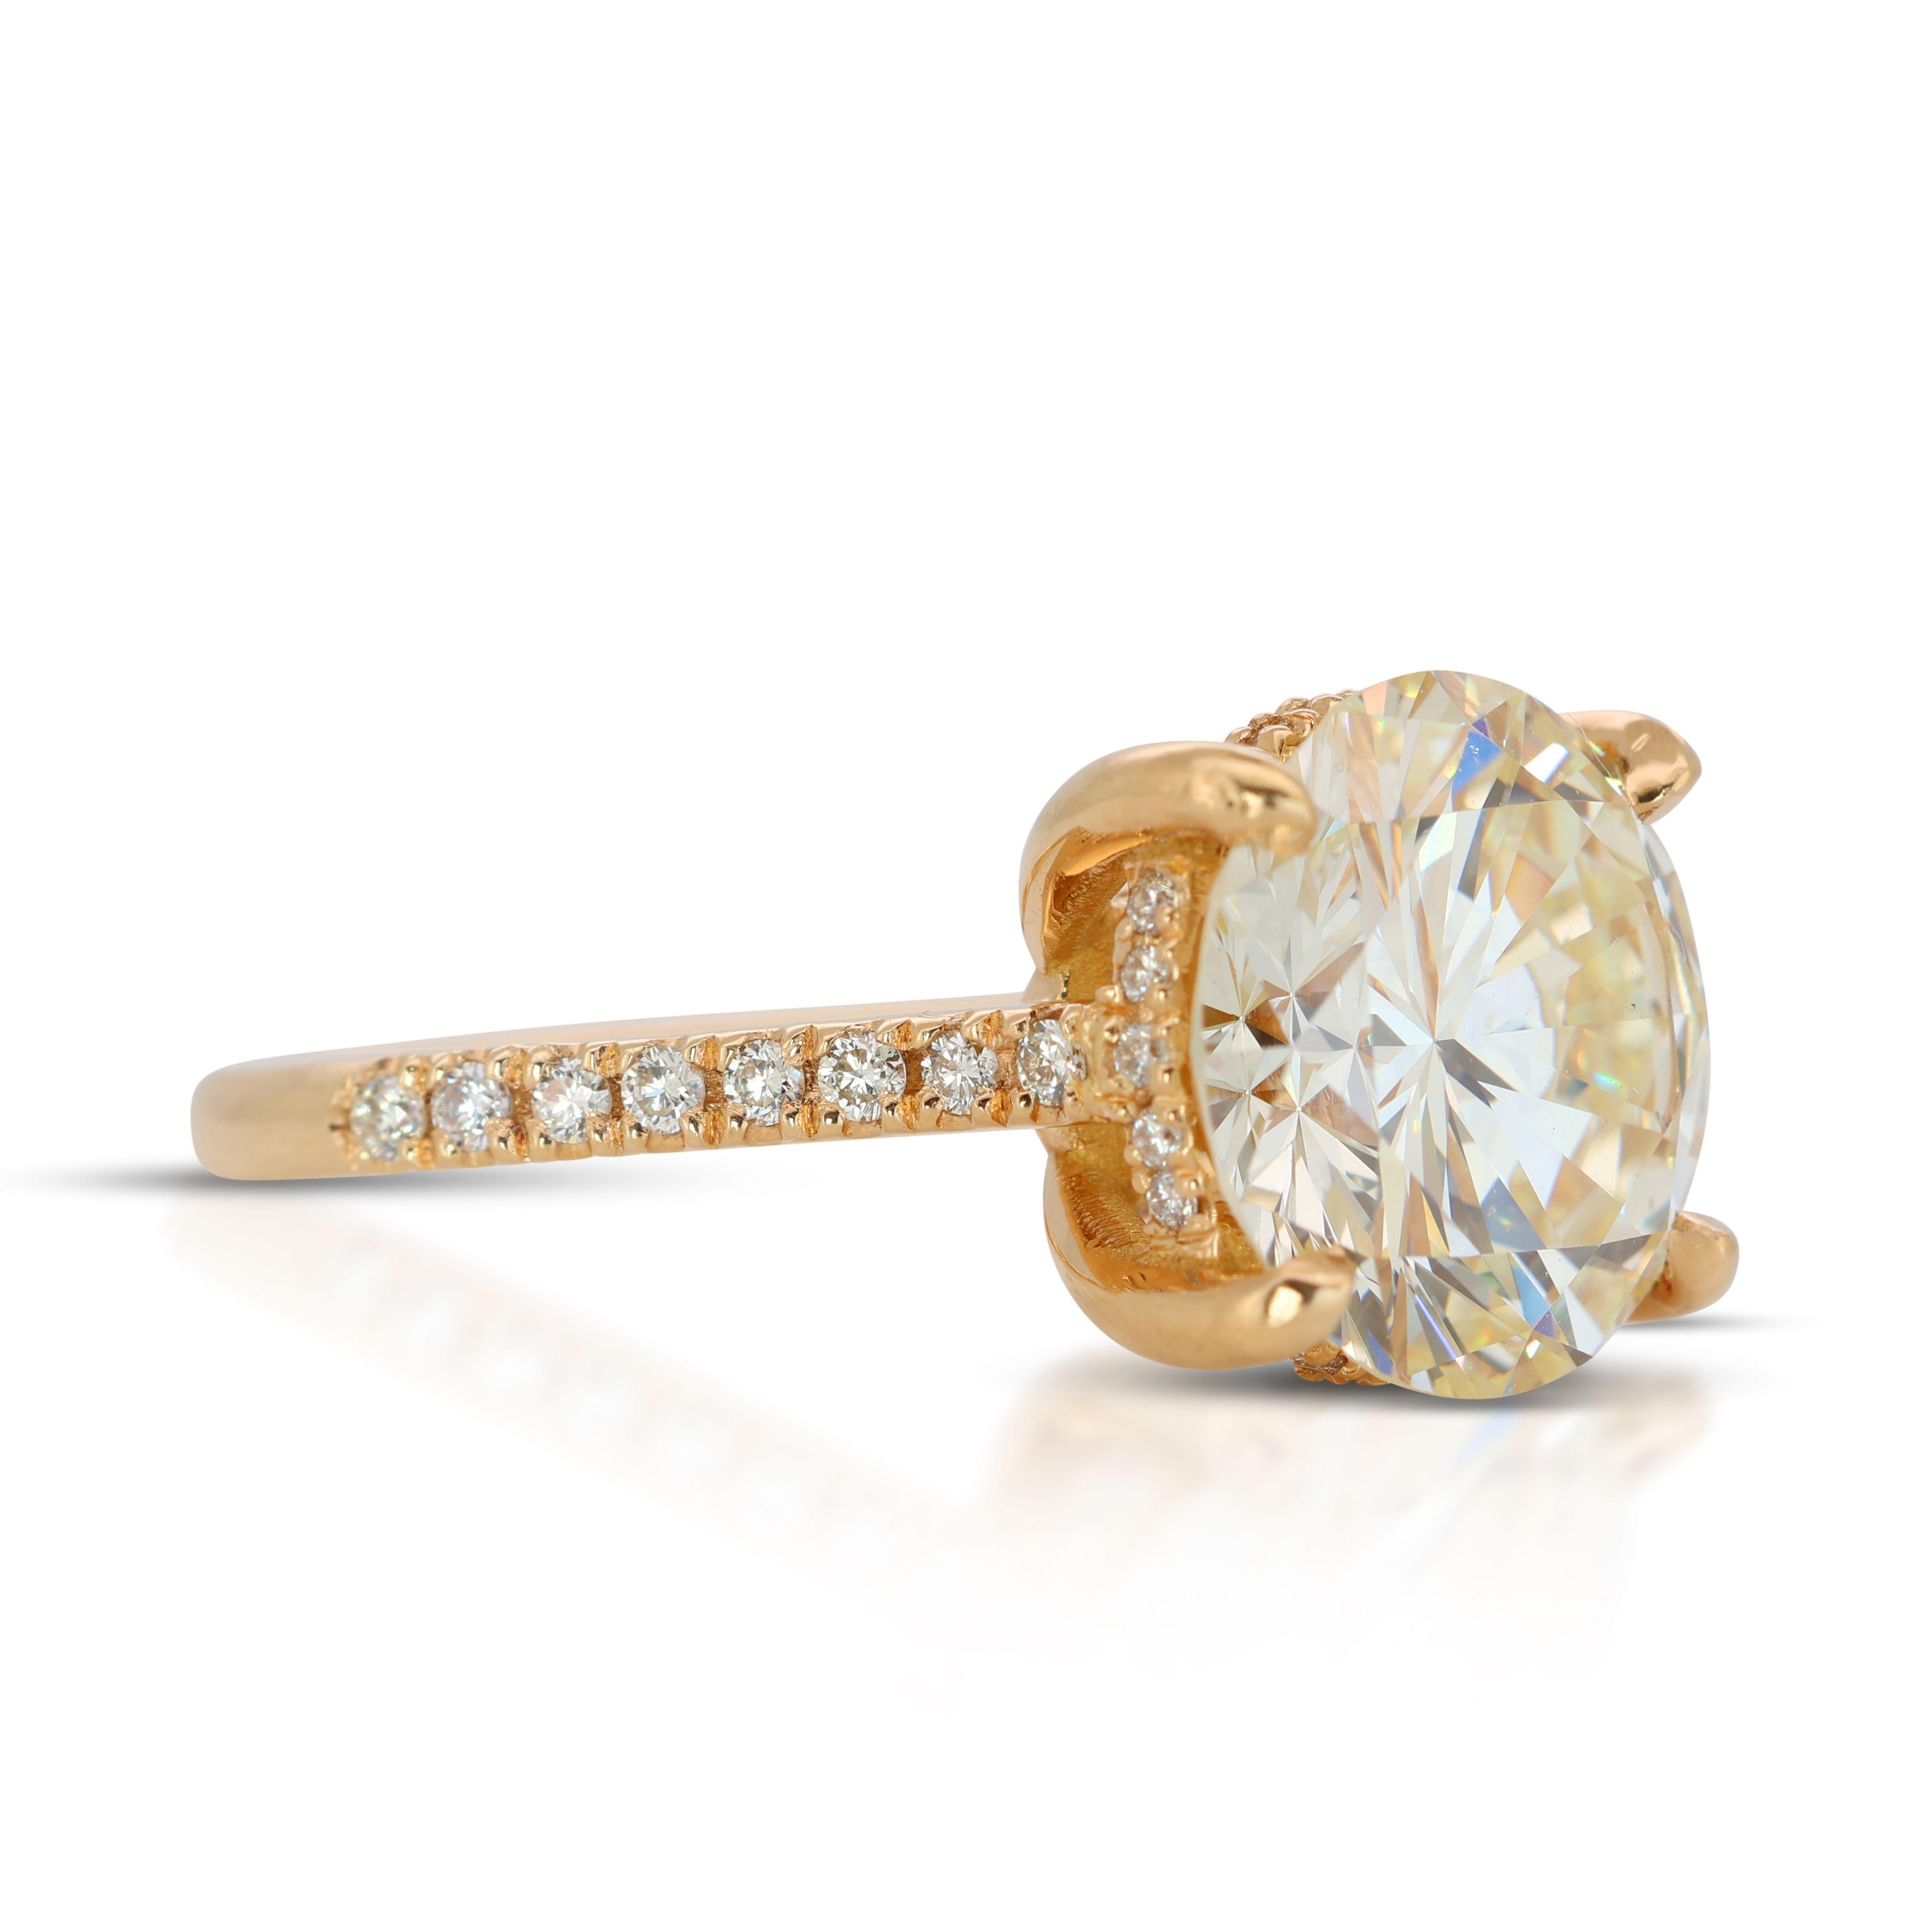 Captivating 3.77ct Pave Diamond Ring in 18K Yellow Gold In New Condition For Sale In רמת גן, IL